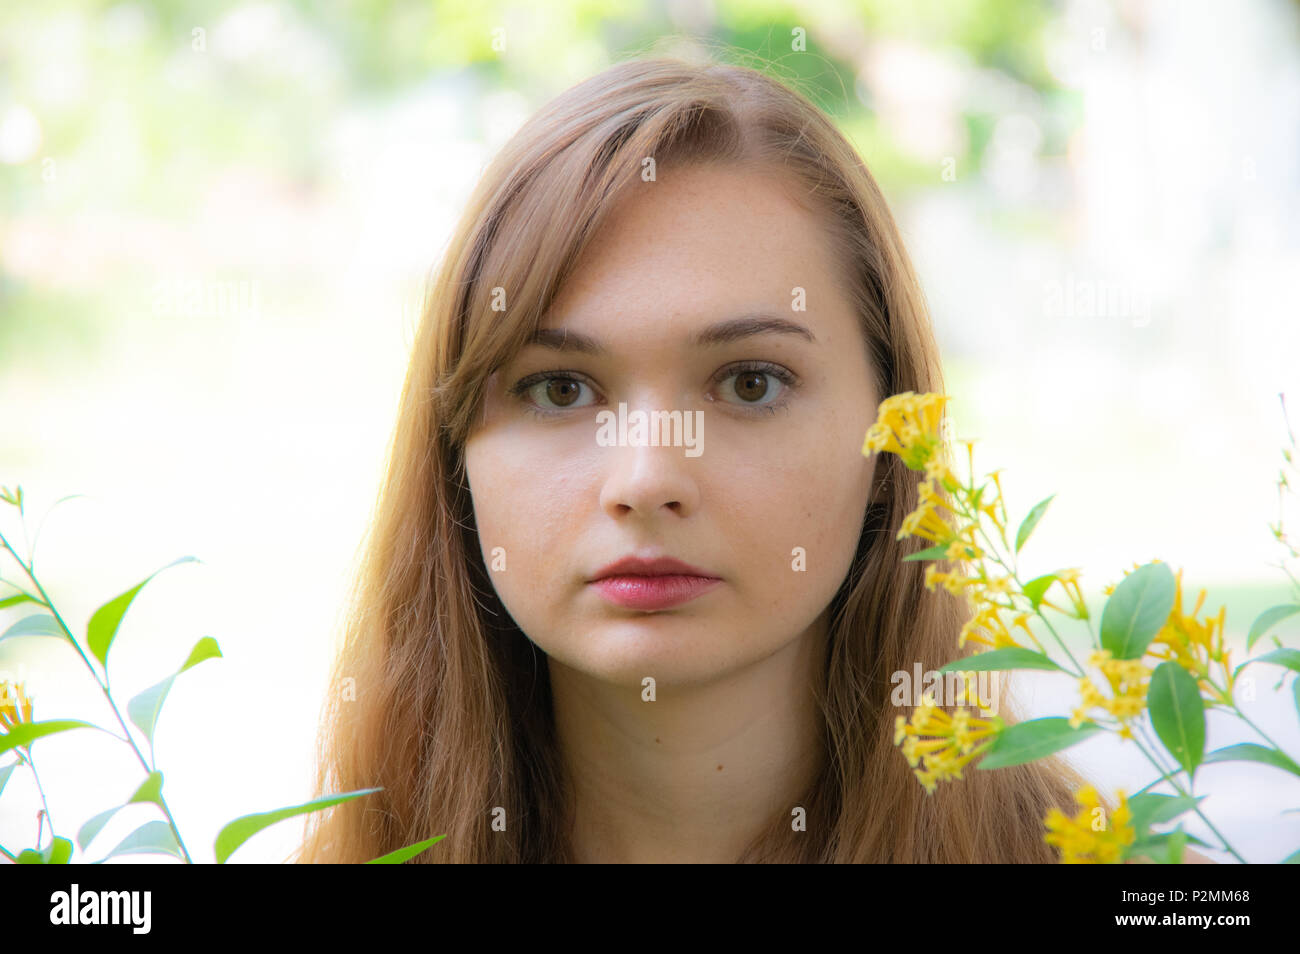 Pretty Red Haired Girl with Yellow Flowers Stock Photo